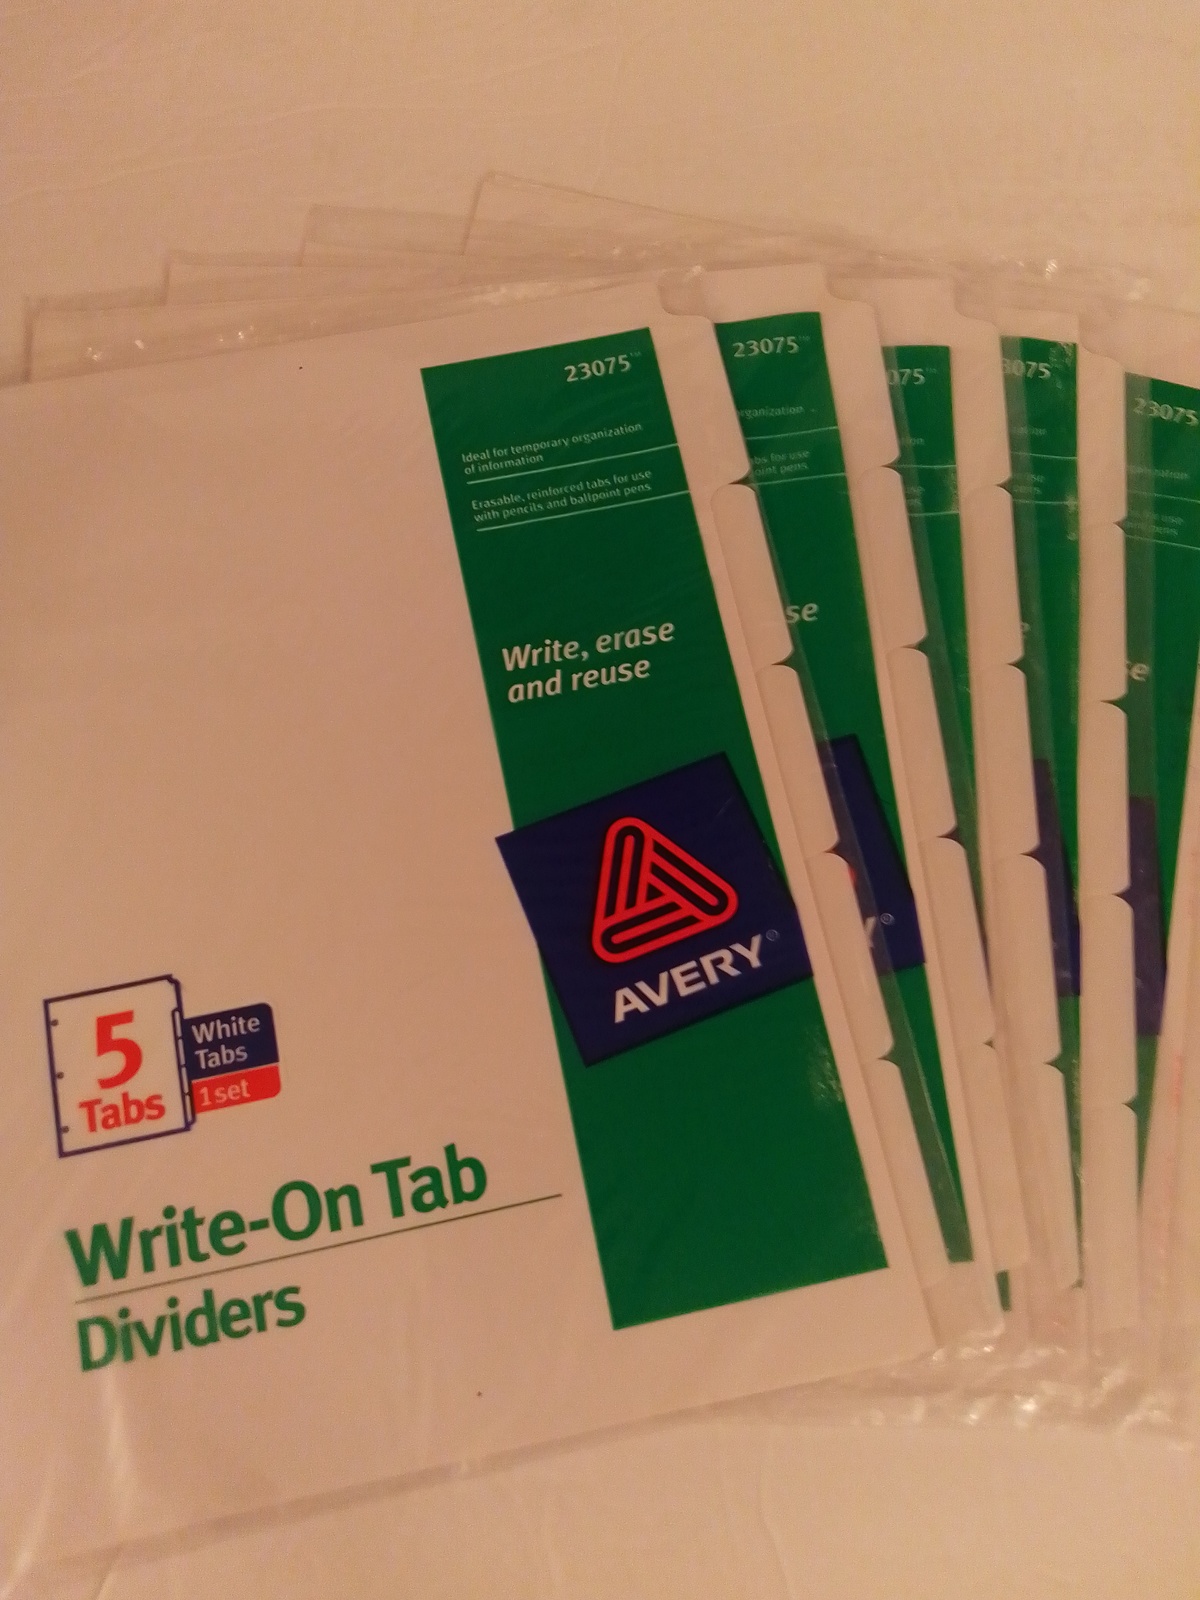 Avery 23075 5 Tab Eraseable Write-On Tab Dividers 1 Set Per Pack Lot Of 5 Packs - $17.99